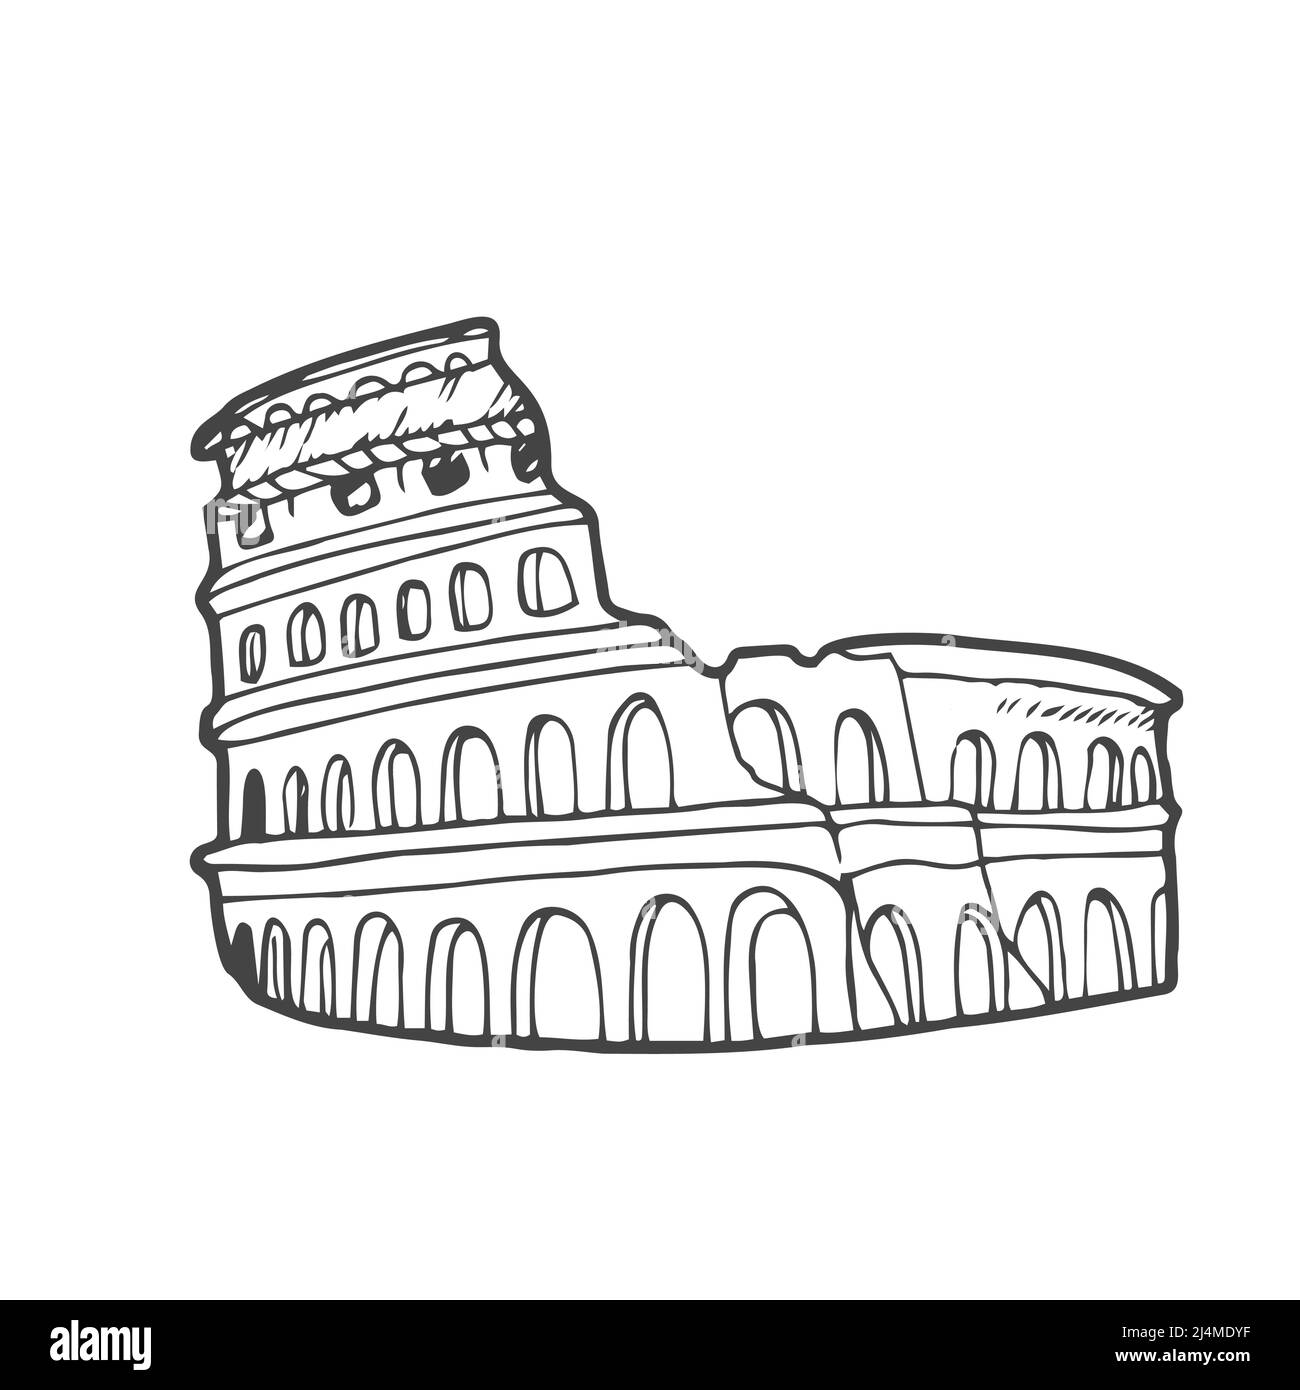 Doodle coliseum isolaten on white. Outline icon. Hand drawing line art. Tourism symbol. Stock Vector